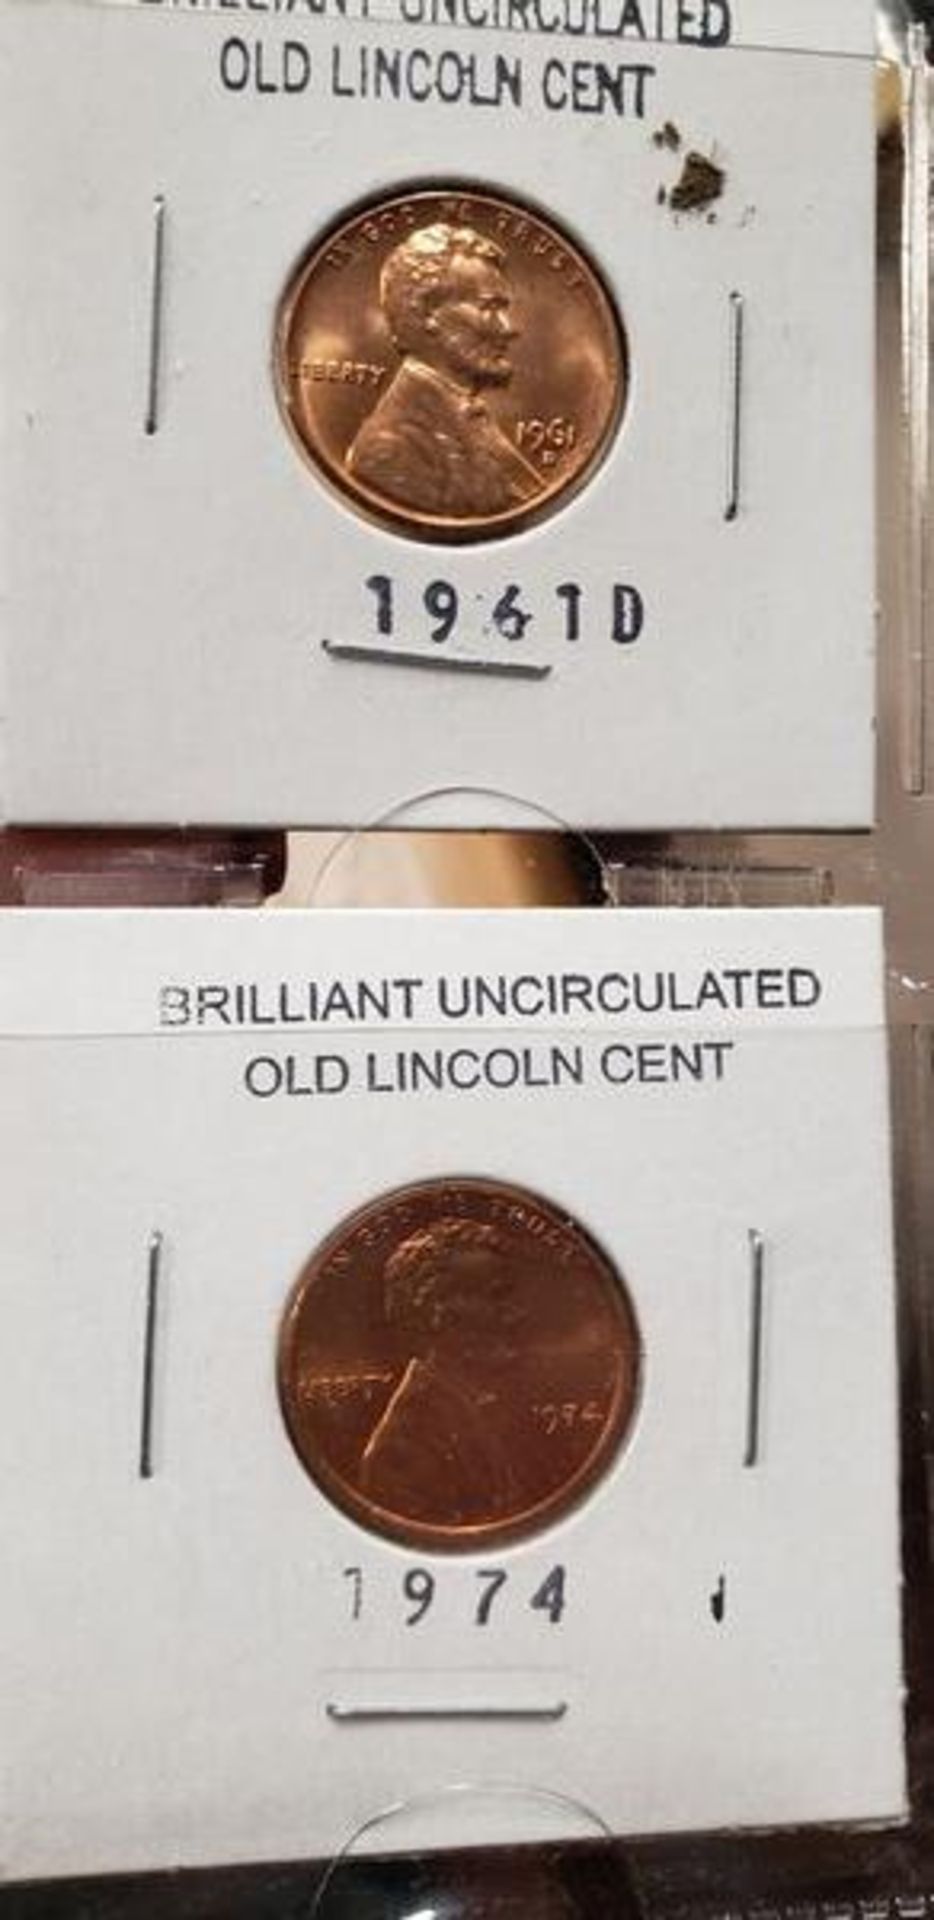 LOT OF 8 BRILLIANT UNCIRCULATED OLD LINCOLN CENTS - Image 4 of 9